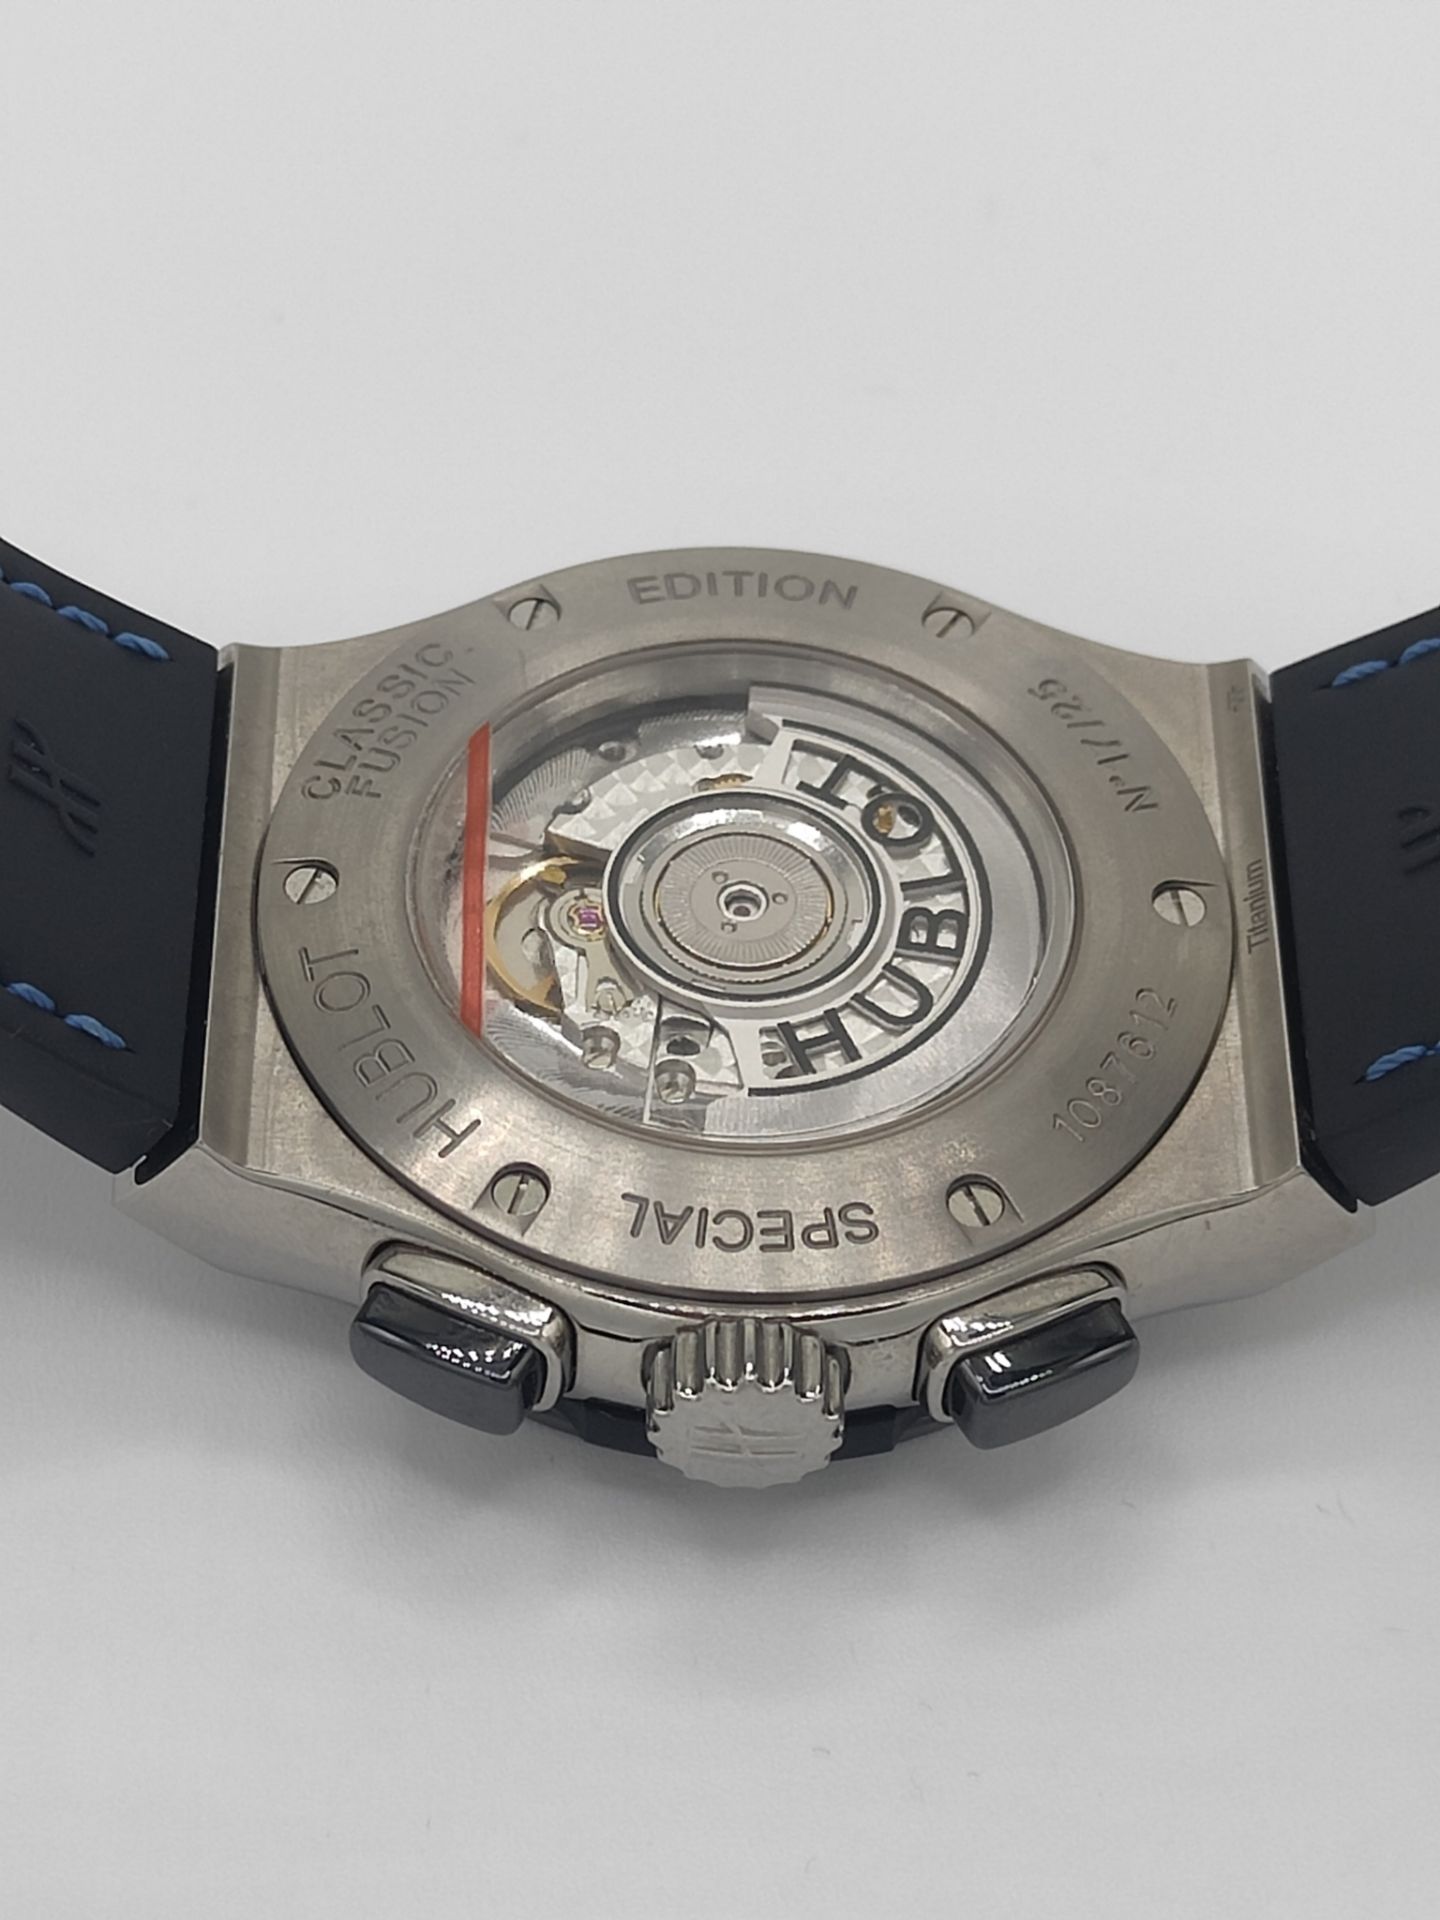 Hublot Classic Fusion Special Edition Watch - Image 9 of 11